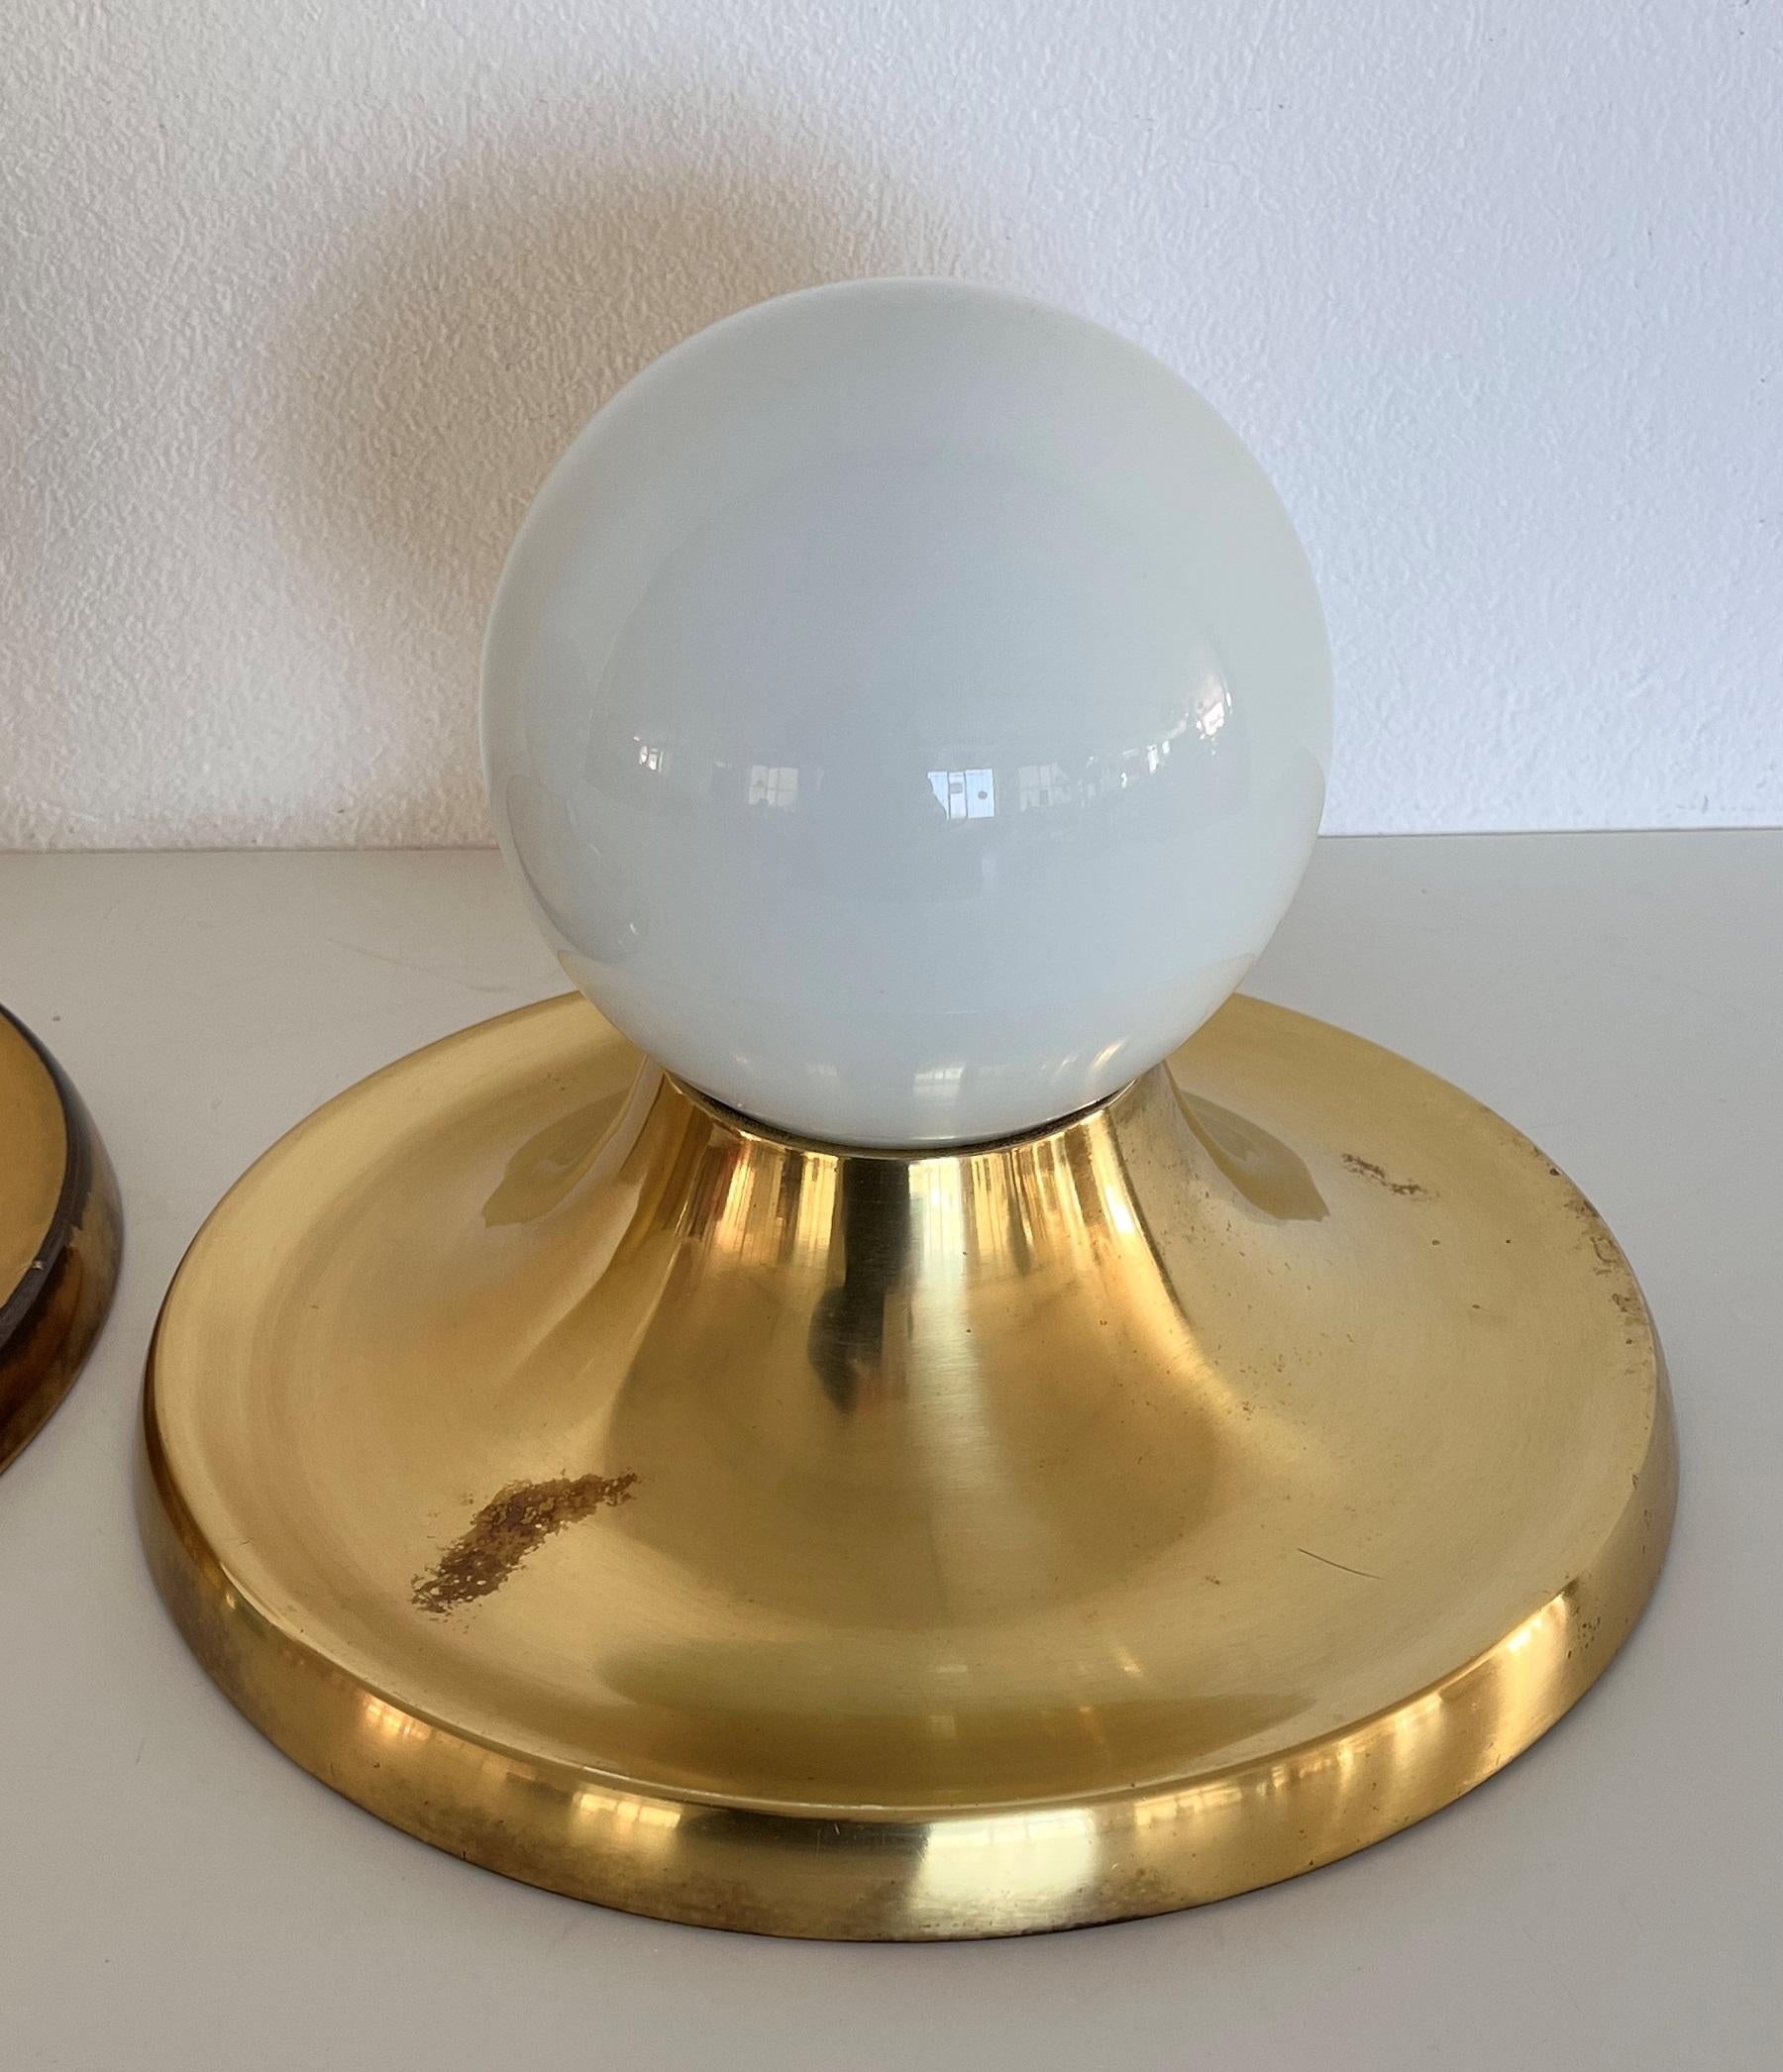 Italian Achille Castiglioni 'Light Ball' Wall or Ceiling Lamp for Flos, 1960s For Sale 5